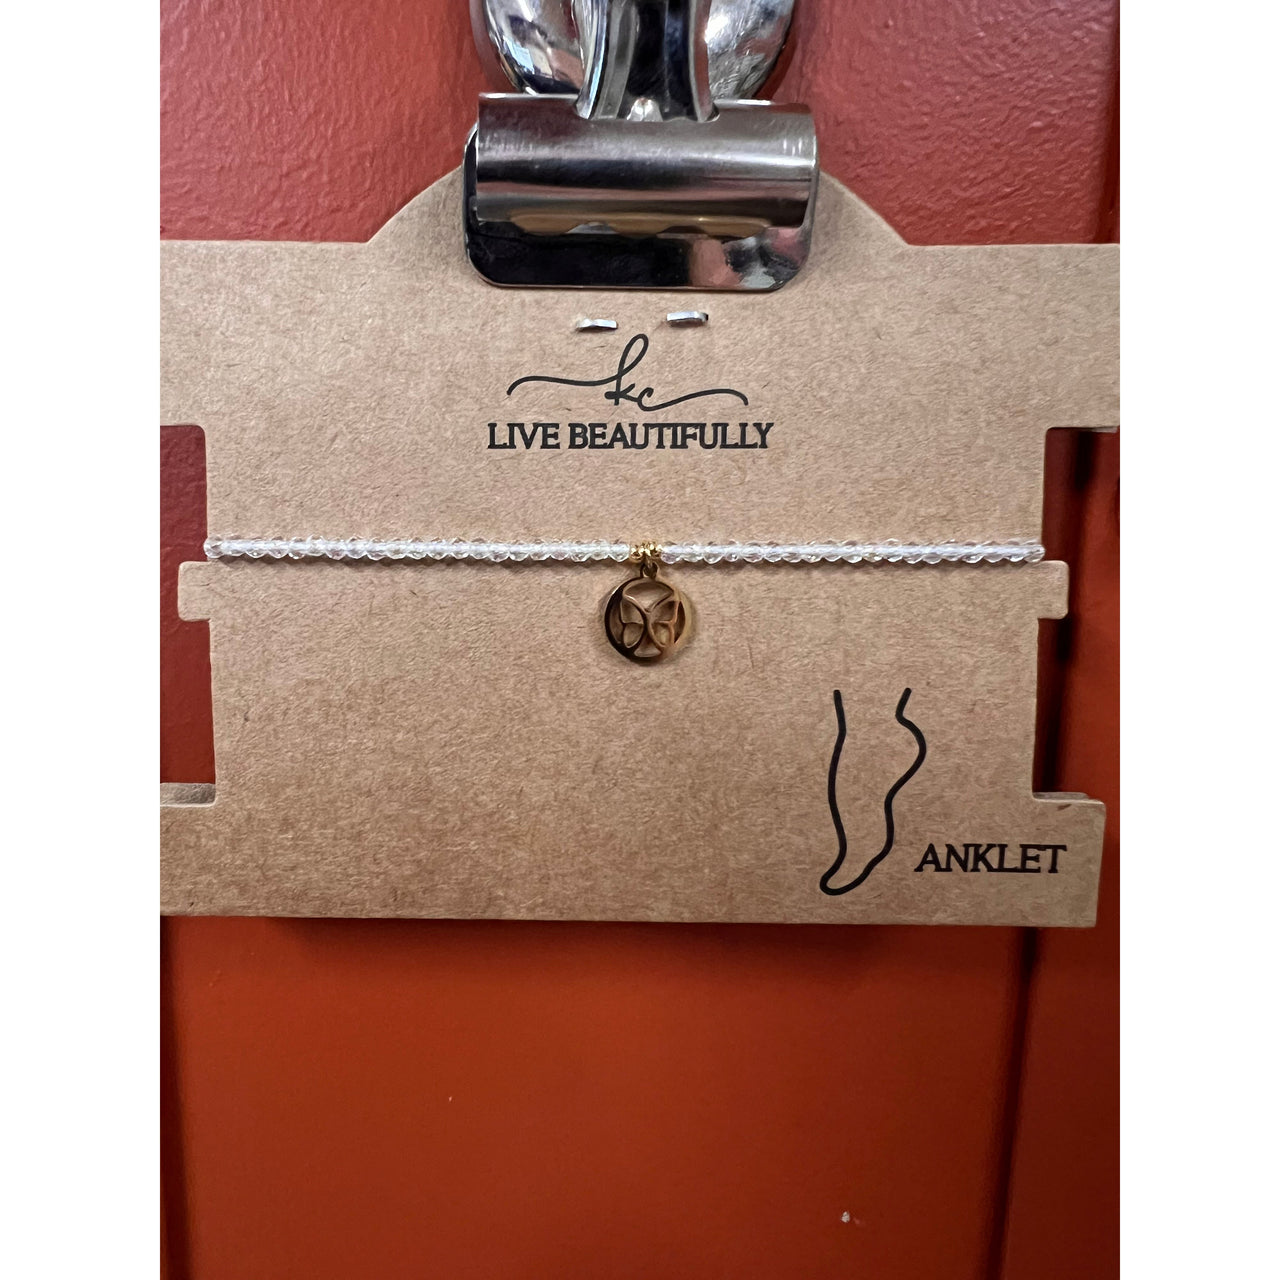 Live Beautifully Anklet - Butterfly